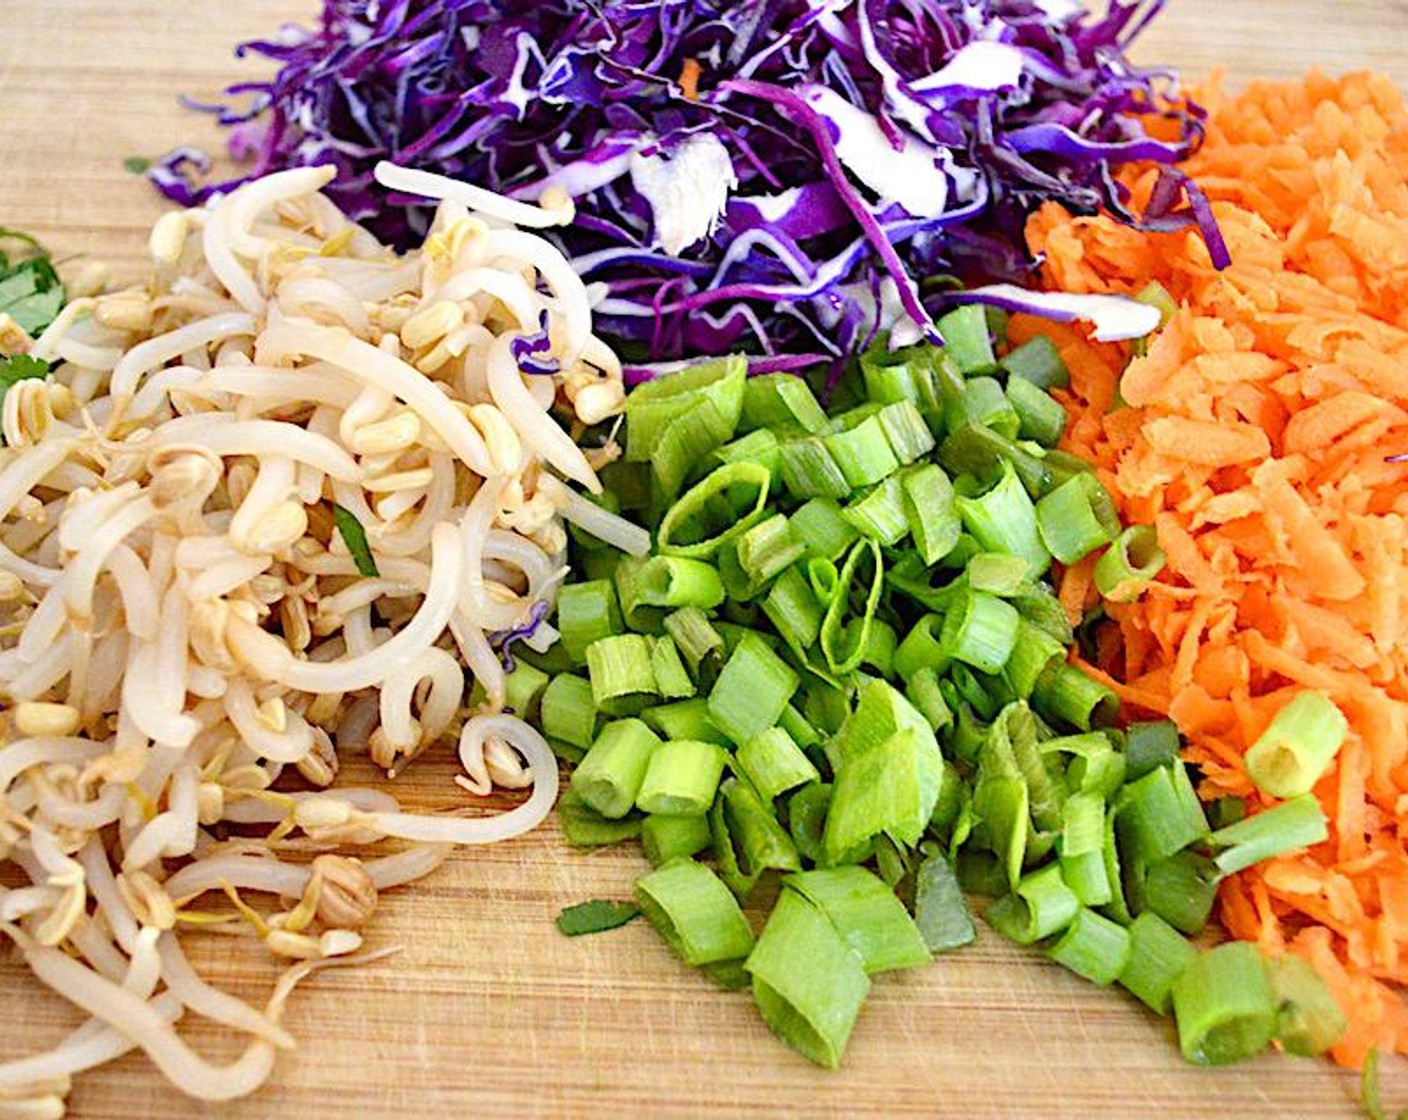 step 2 Transfer the noodles to a large salad bowl and toss them with the Carrots (3), Red Cabbage (2 cups), Scallion (1 bunch), Bean Sprouts (1 cup), Dry Roasted Peanuts (1 cup), and Fresh Cilantro (1 Tbsp).